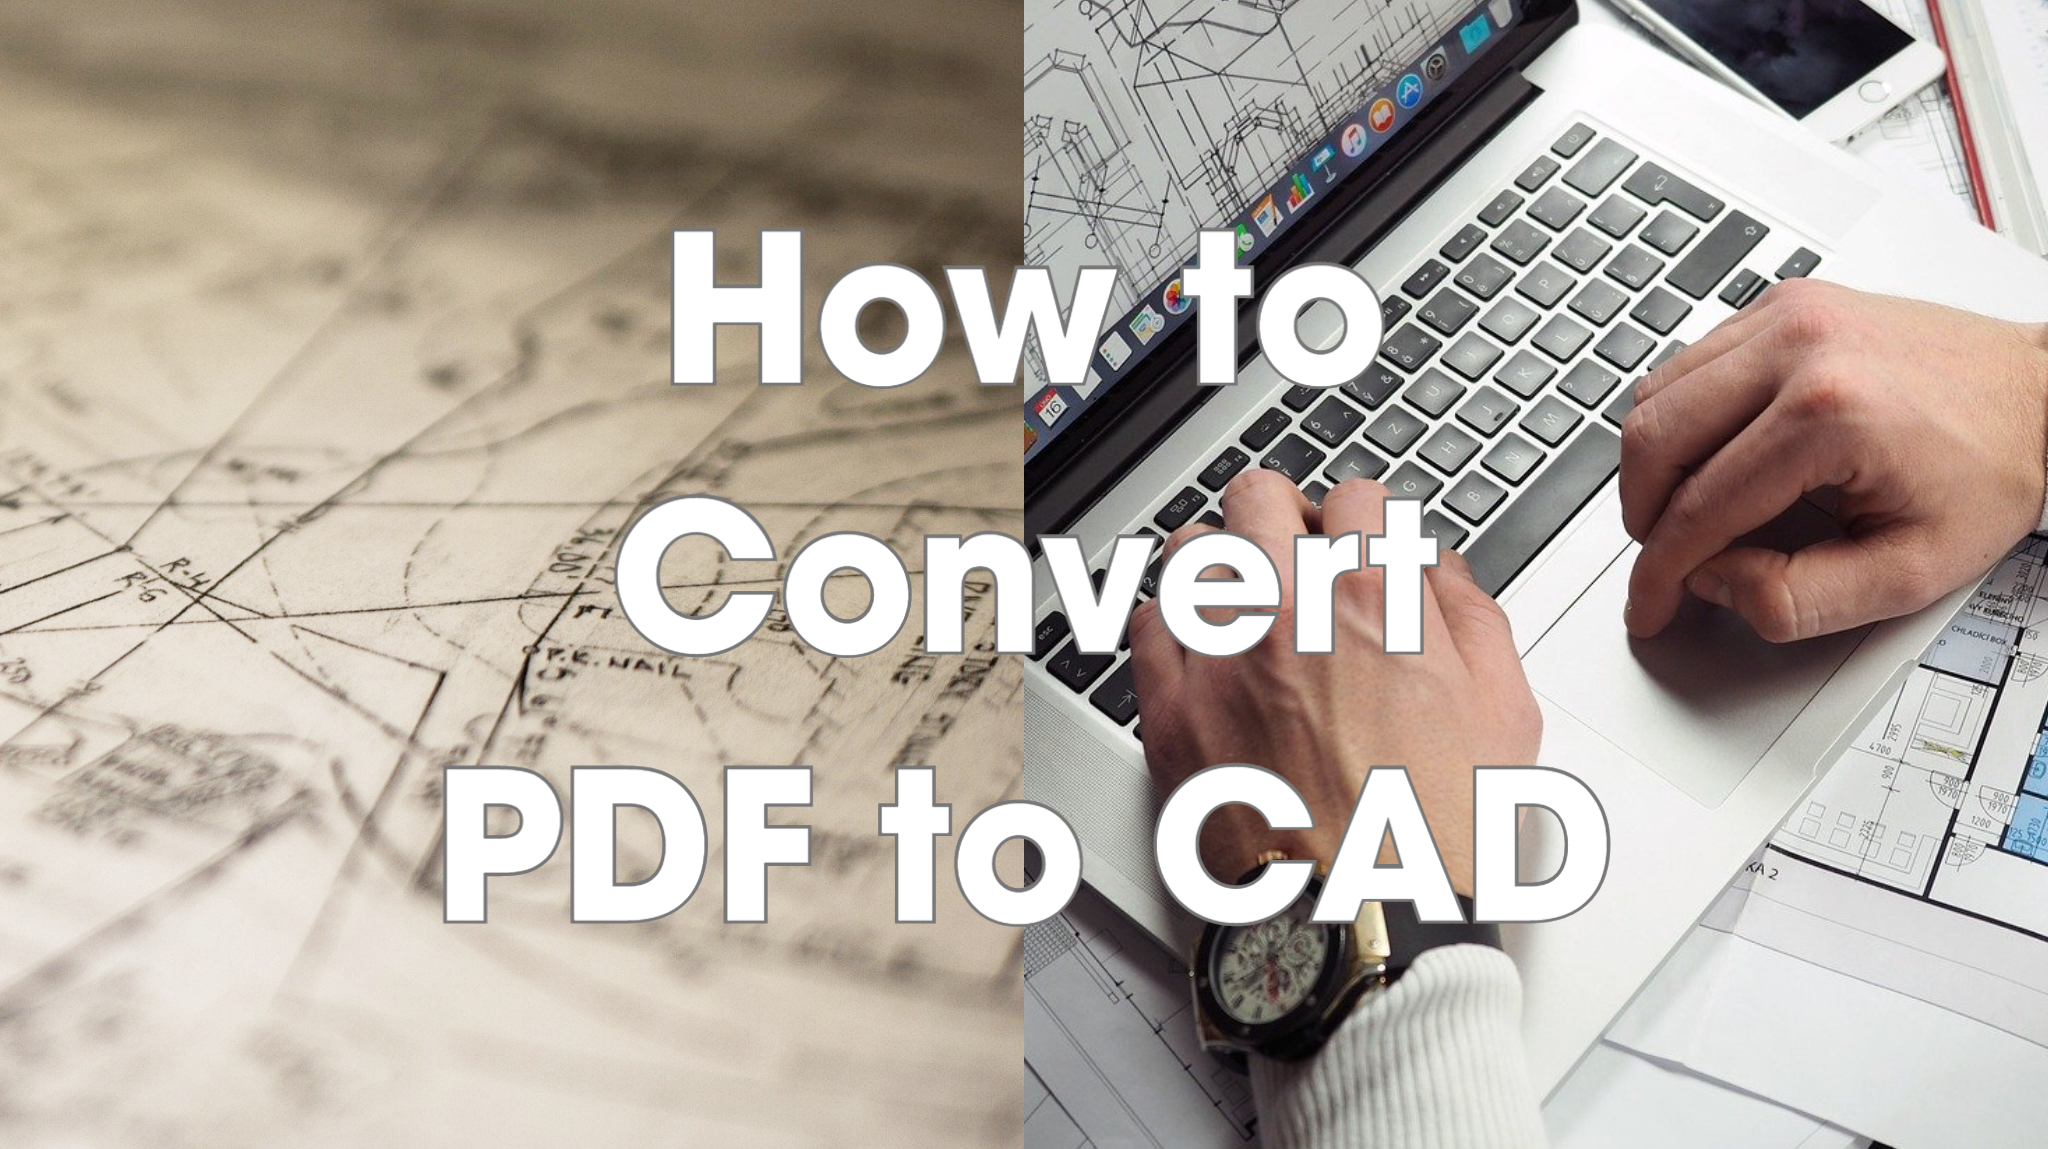 How to Convert PDF to CAD?